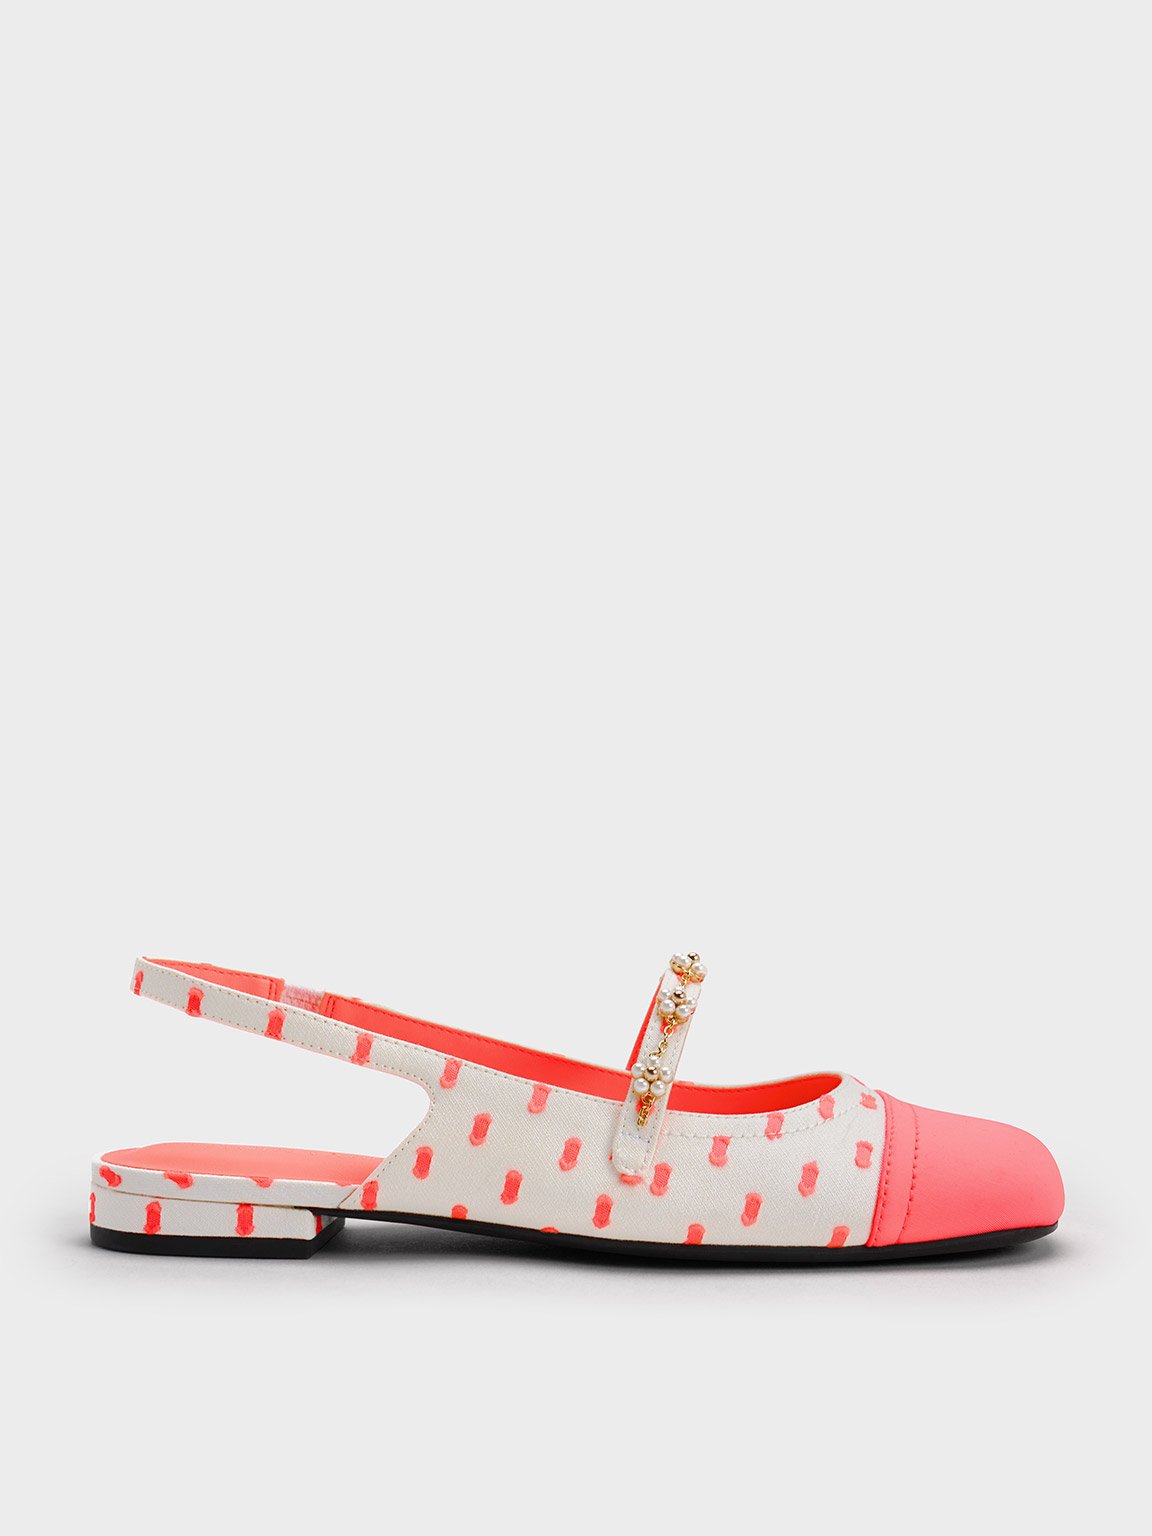 Coral Pink Beaded Flower Printed Slingback Flats - CHARLES & KEITH SG